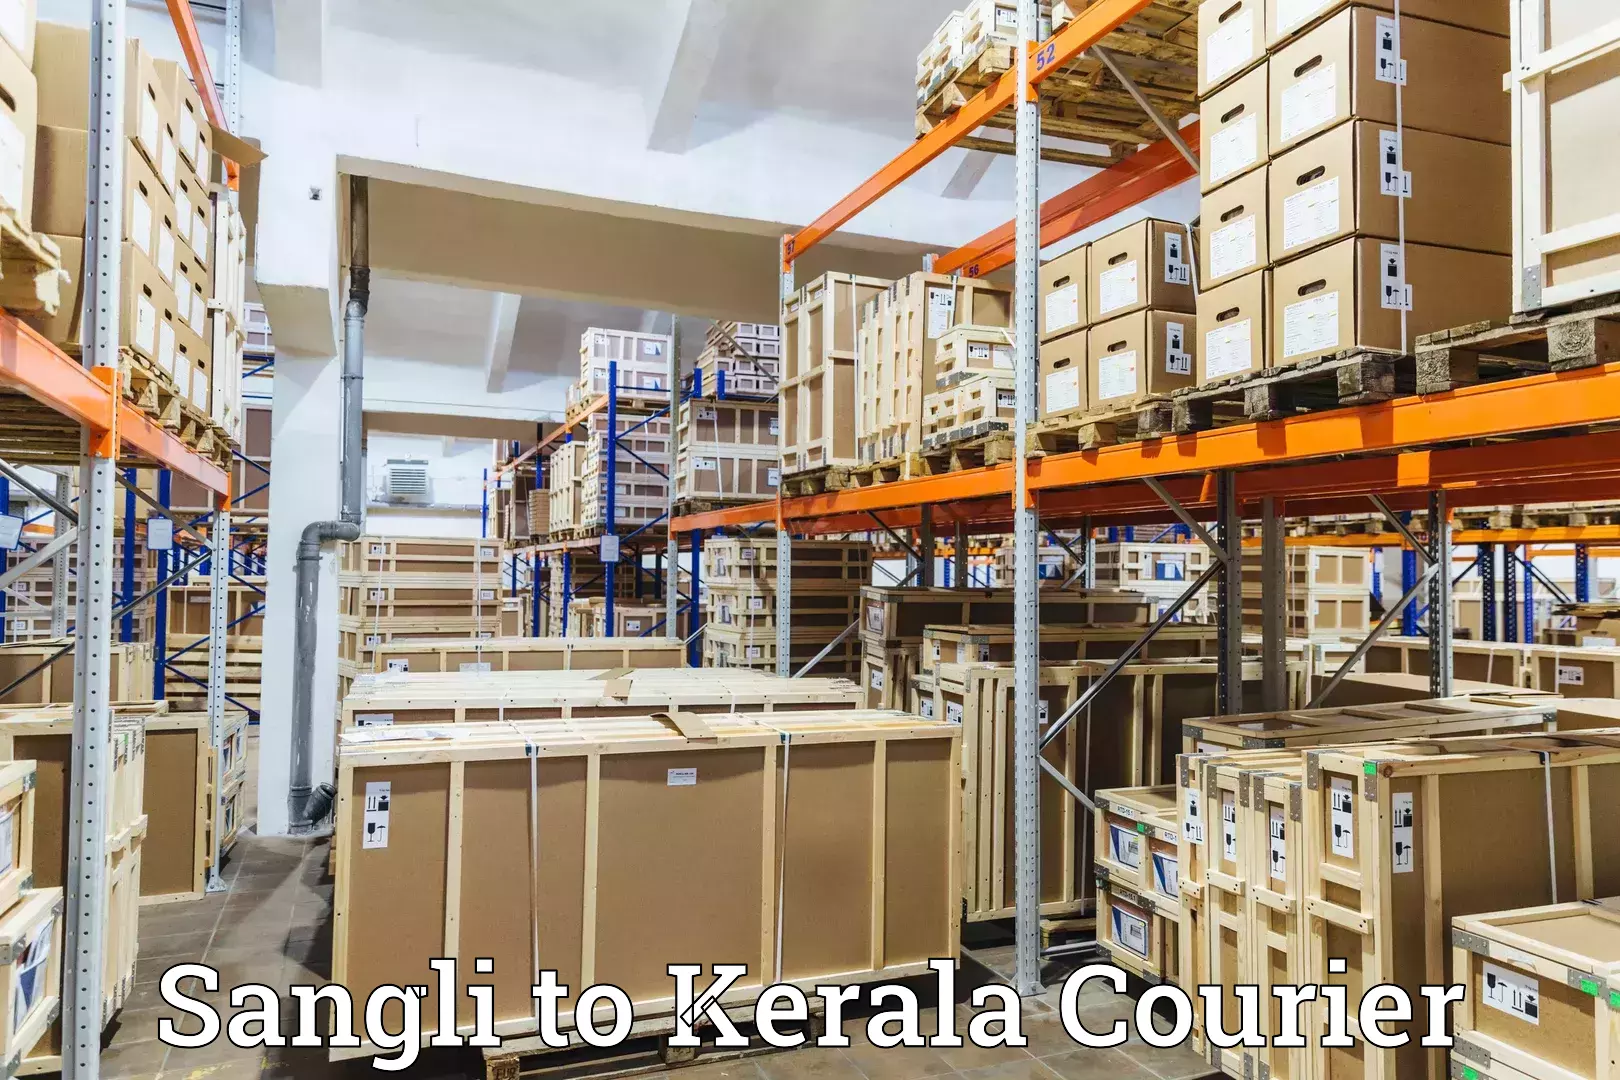 User-friendly delivery service Sangli to Kottayam